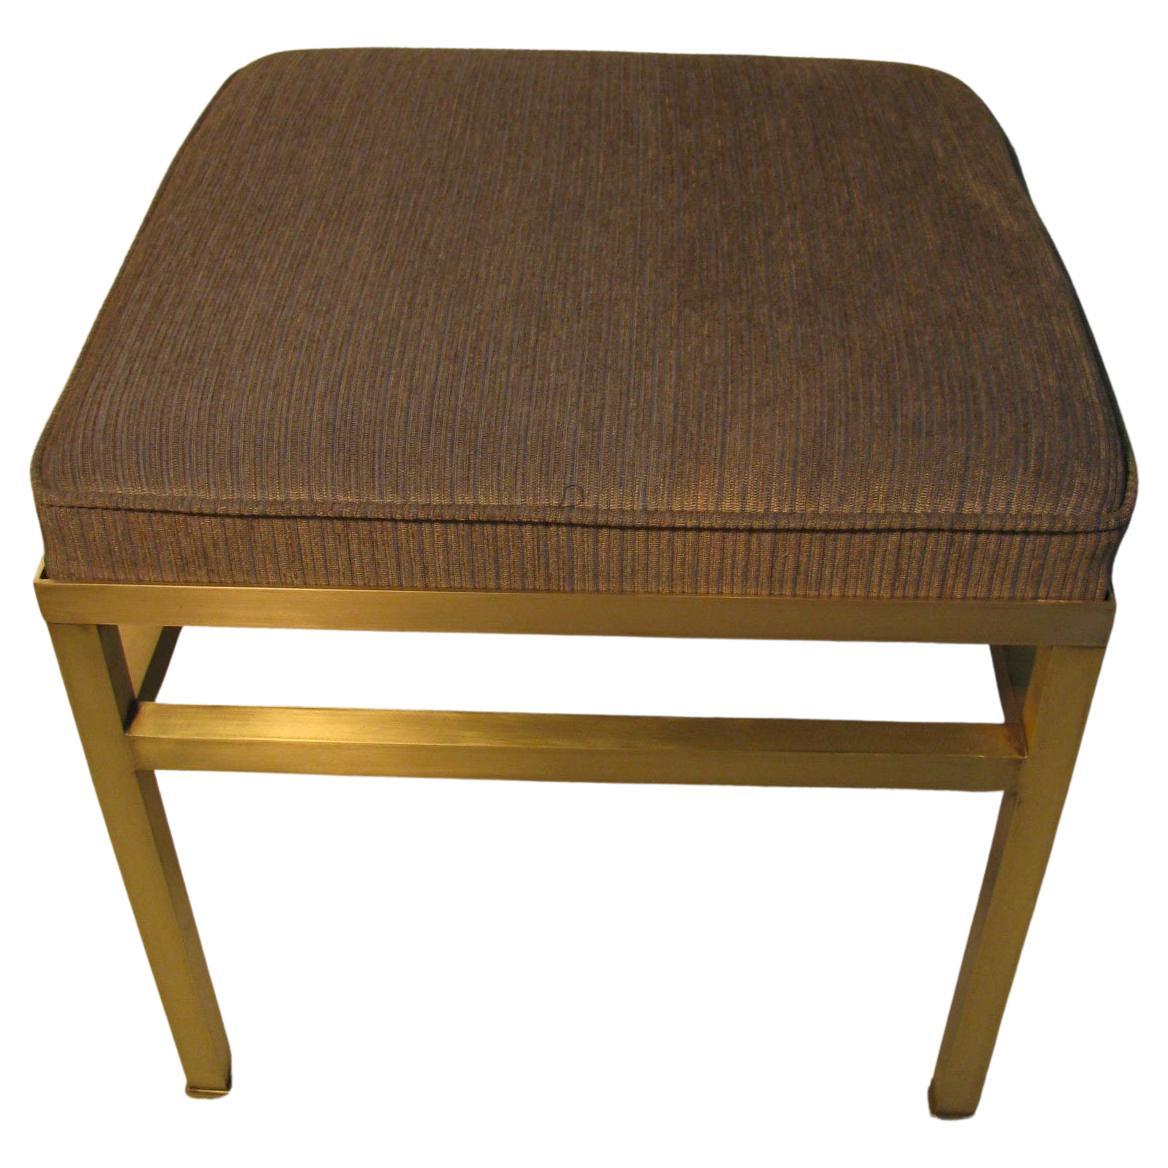 Mid-Century Modern Hollywood Regency Brass Ottoman Footstool In Good Condition For Sale In Port Jervis, NY